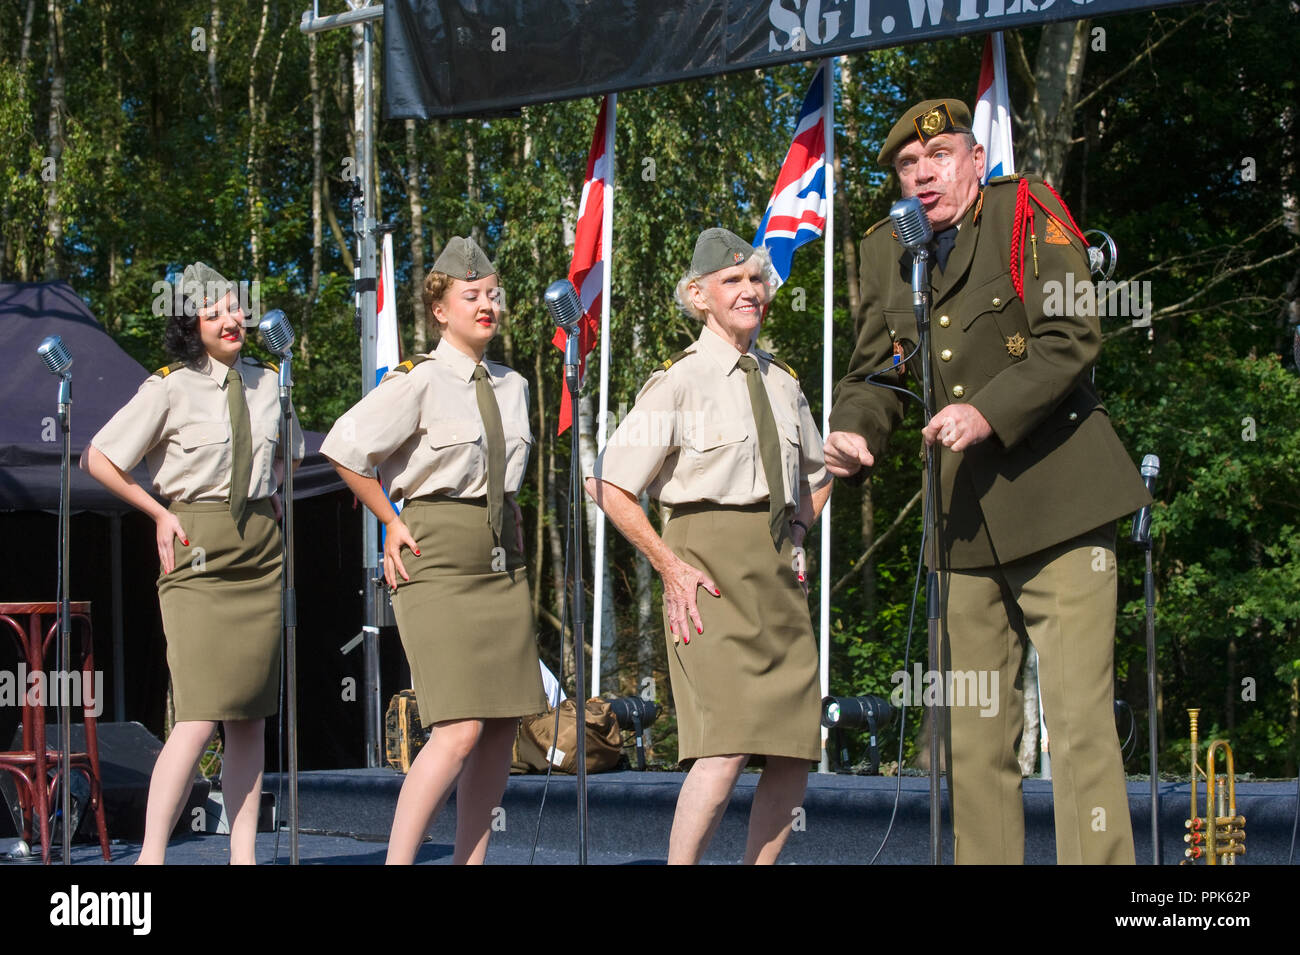 ENSCHEDE, THE NETHERLANDS - 01 SEPT, 2018: 'Sgt. Wilson's army show 'doing their stage act with historic forties songs during a military army show. Stock Photo